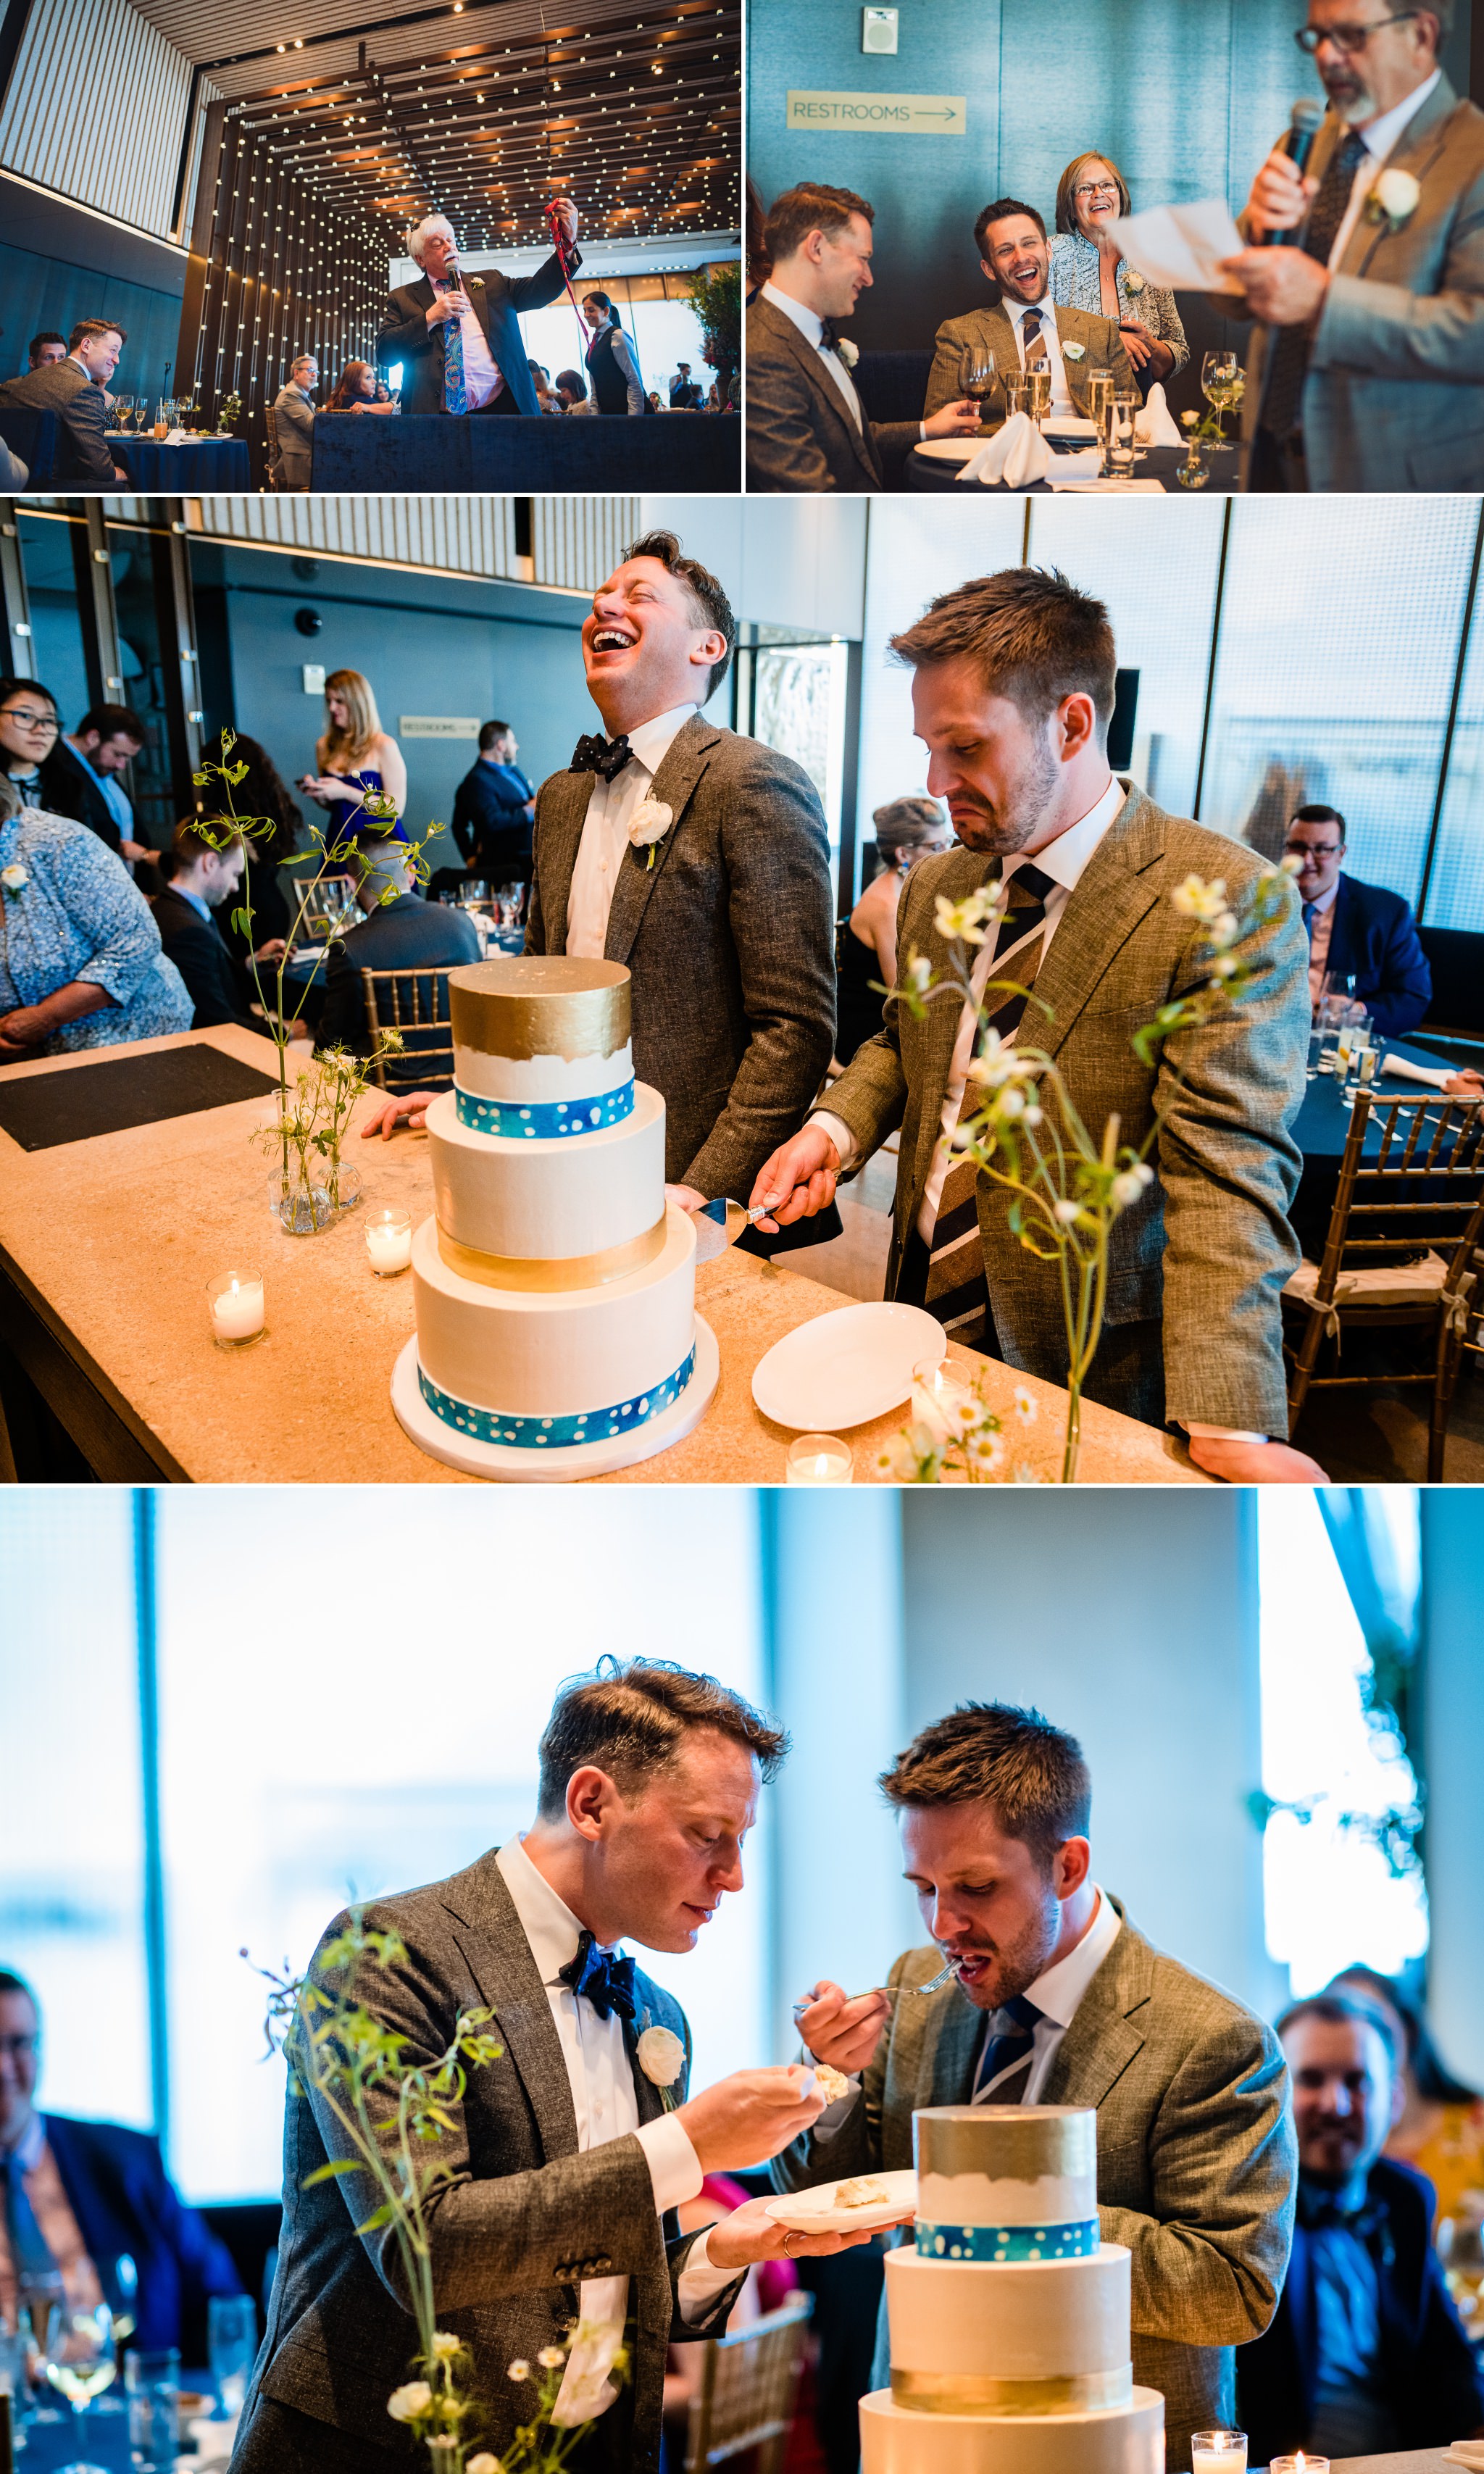  Scenes from Brian and Scotts brunch reception after their wedding ceremony at Riverpark NYC.  This is the cake cutting with a cake from Empire Cakes in Chelsea, Manhattan.  